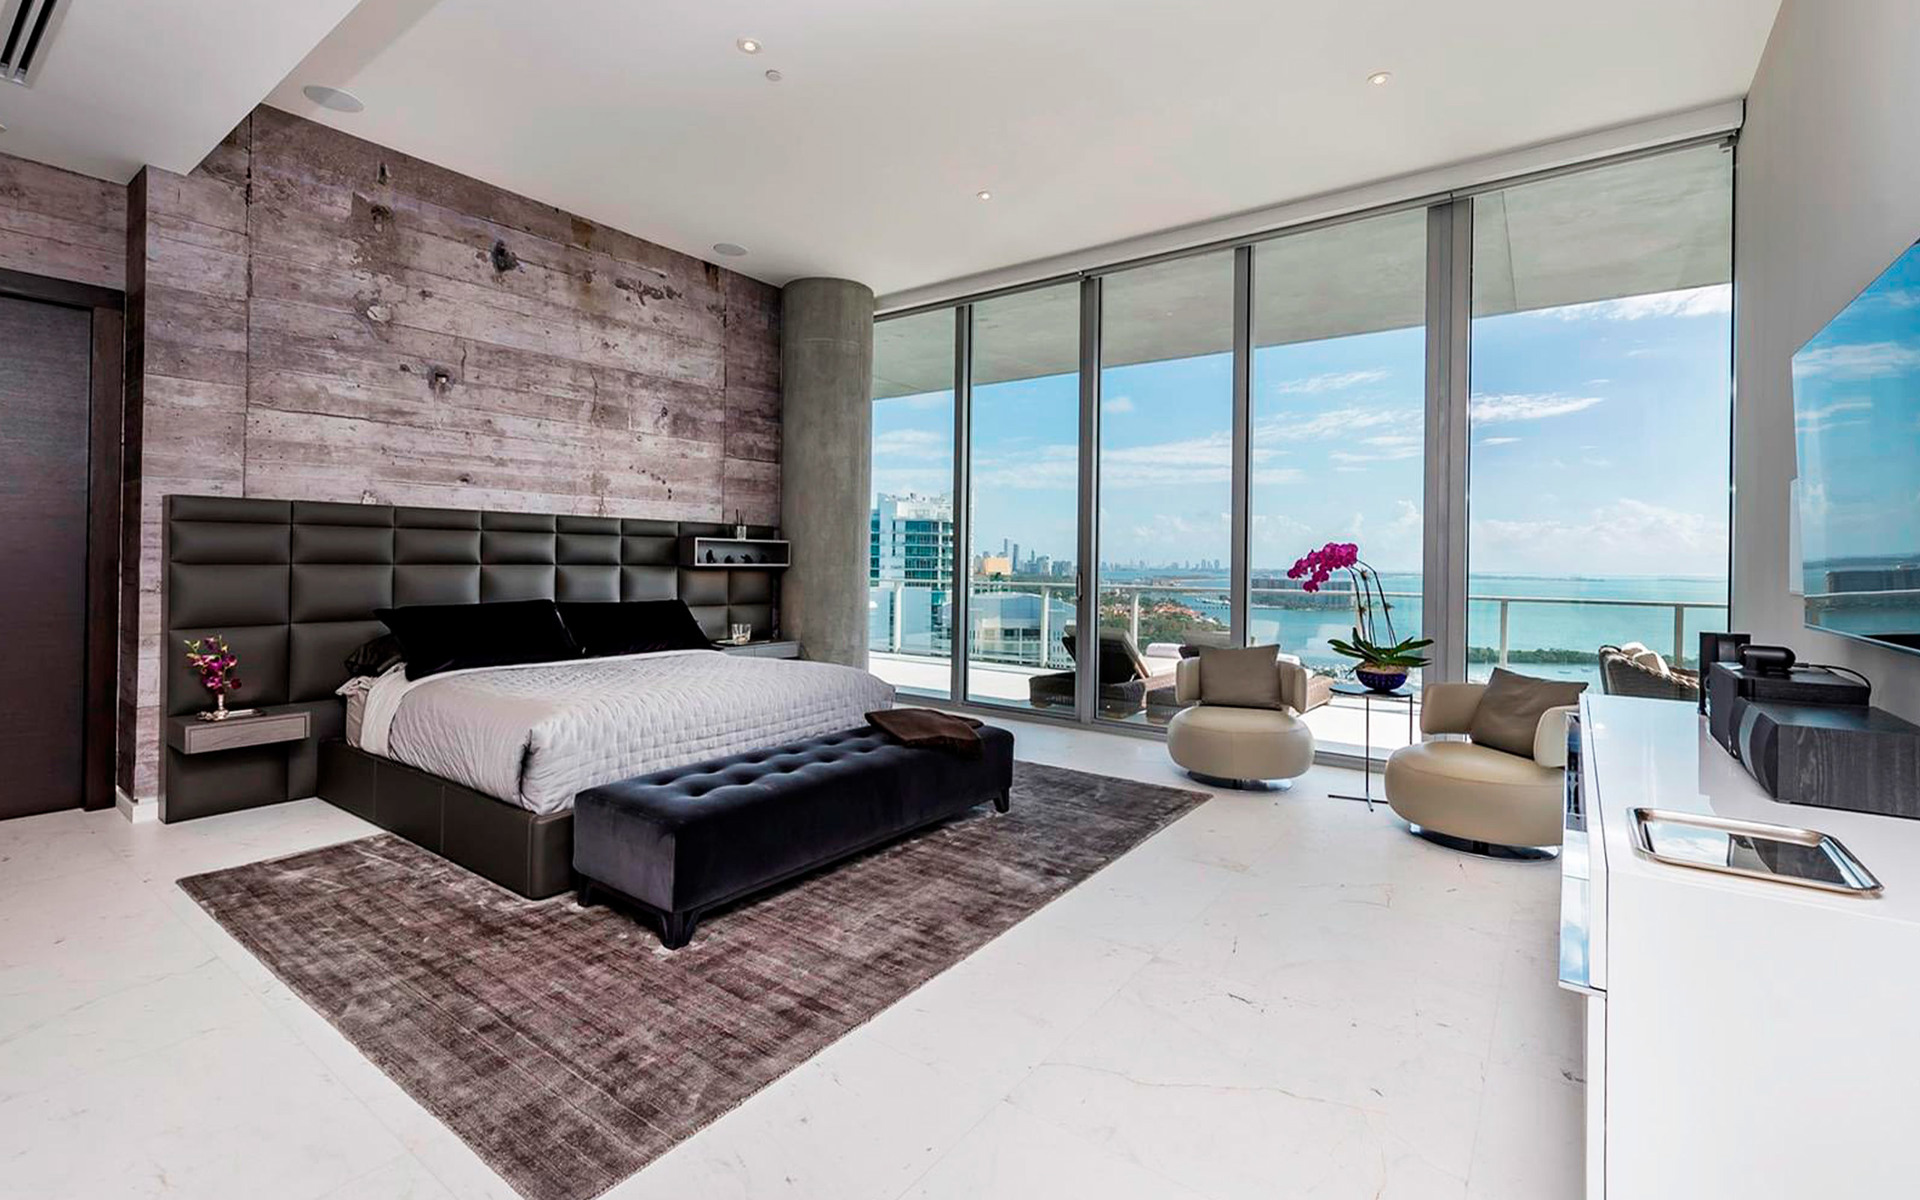 Grove at Grand Bay Miami: Architectural Elegance Meets Ecological Innovation